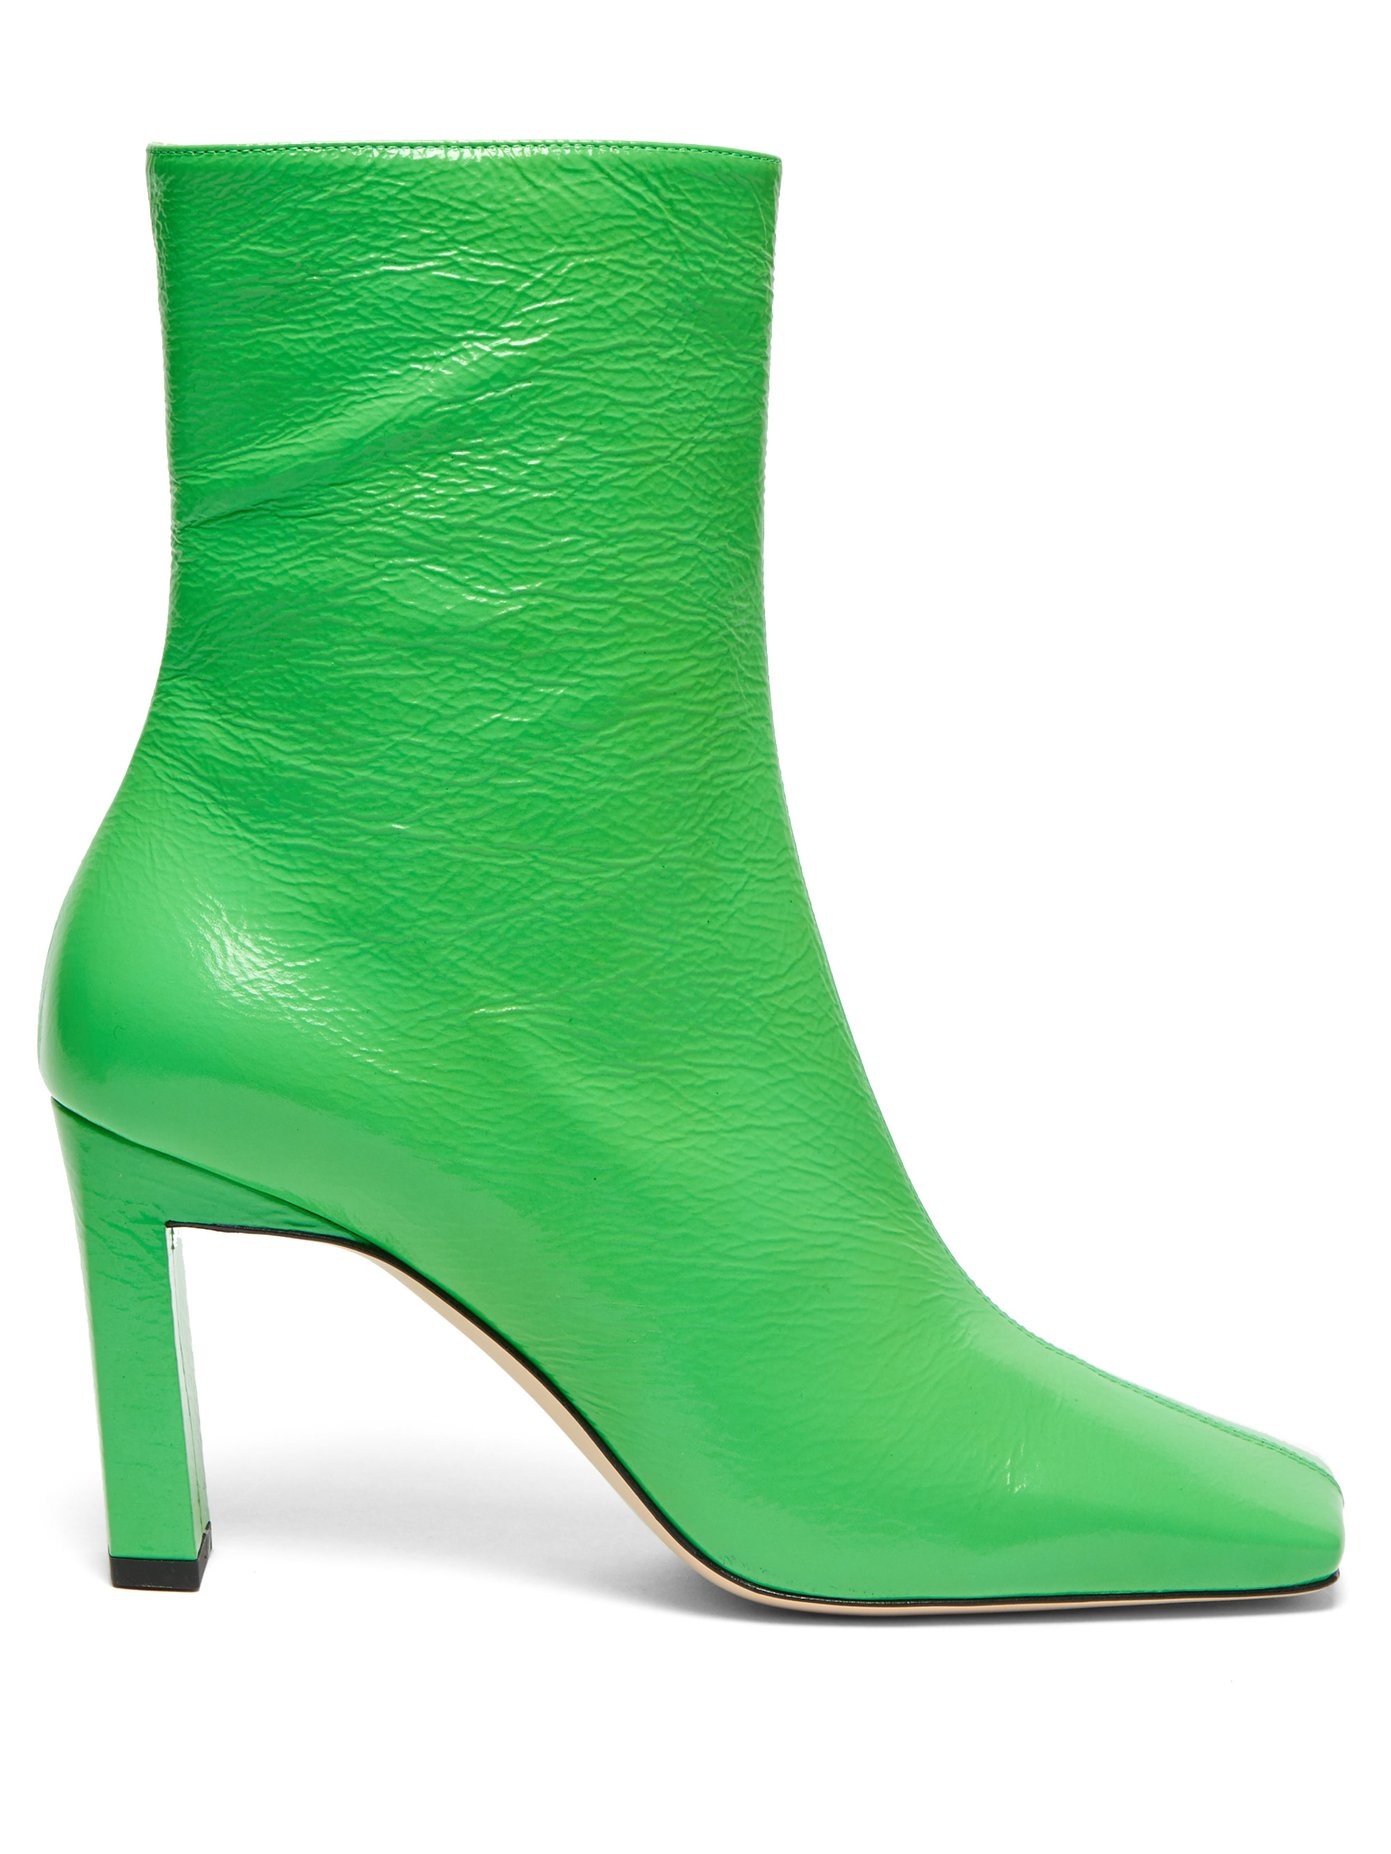 green leather ankle boots uk